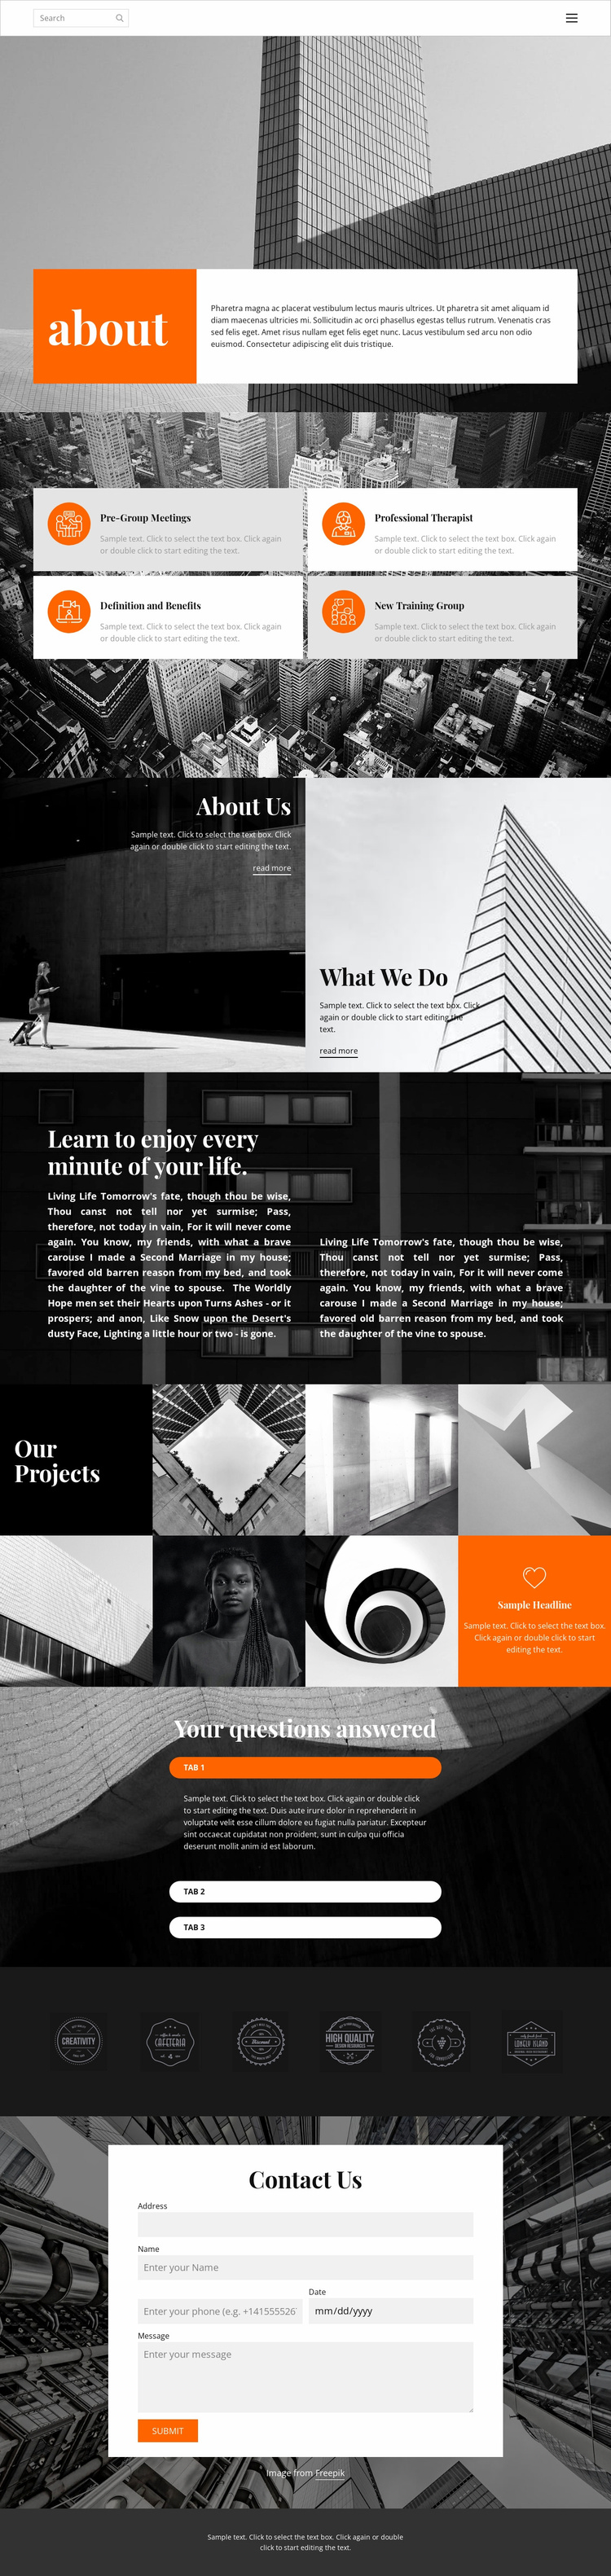 New projects studio Website Template